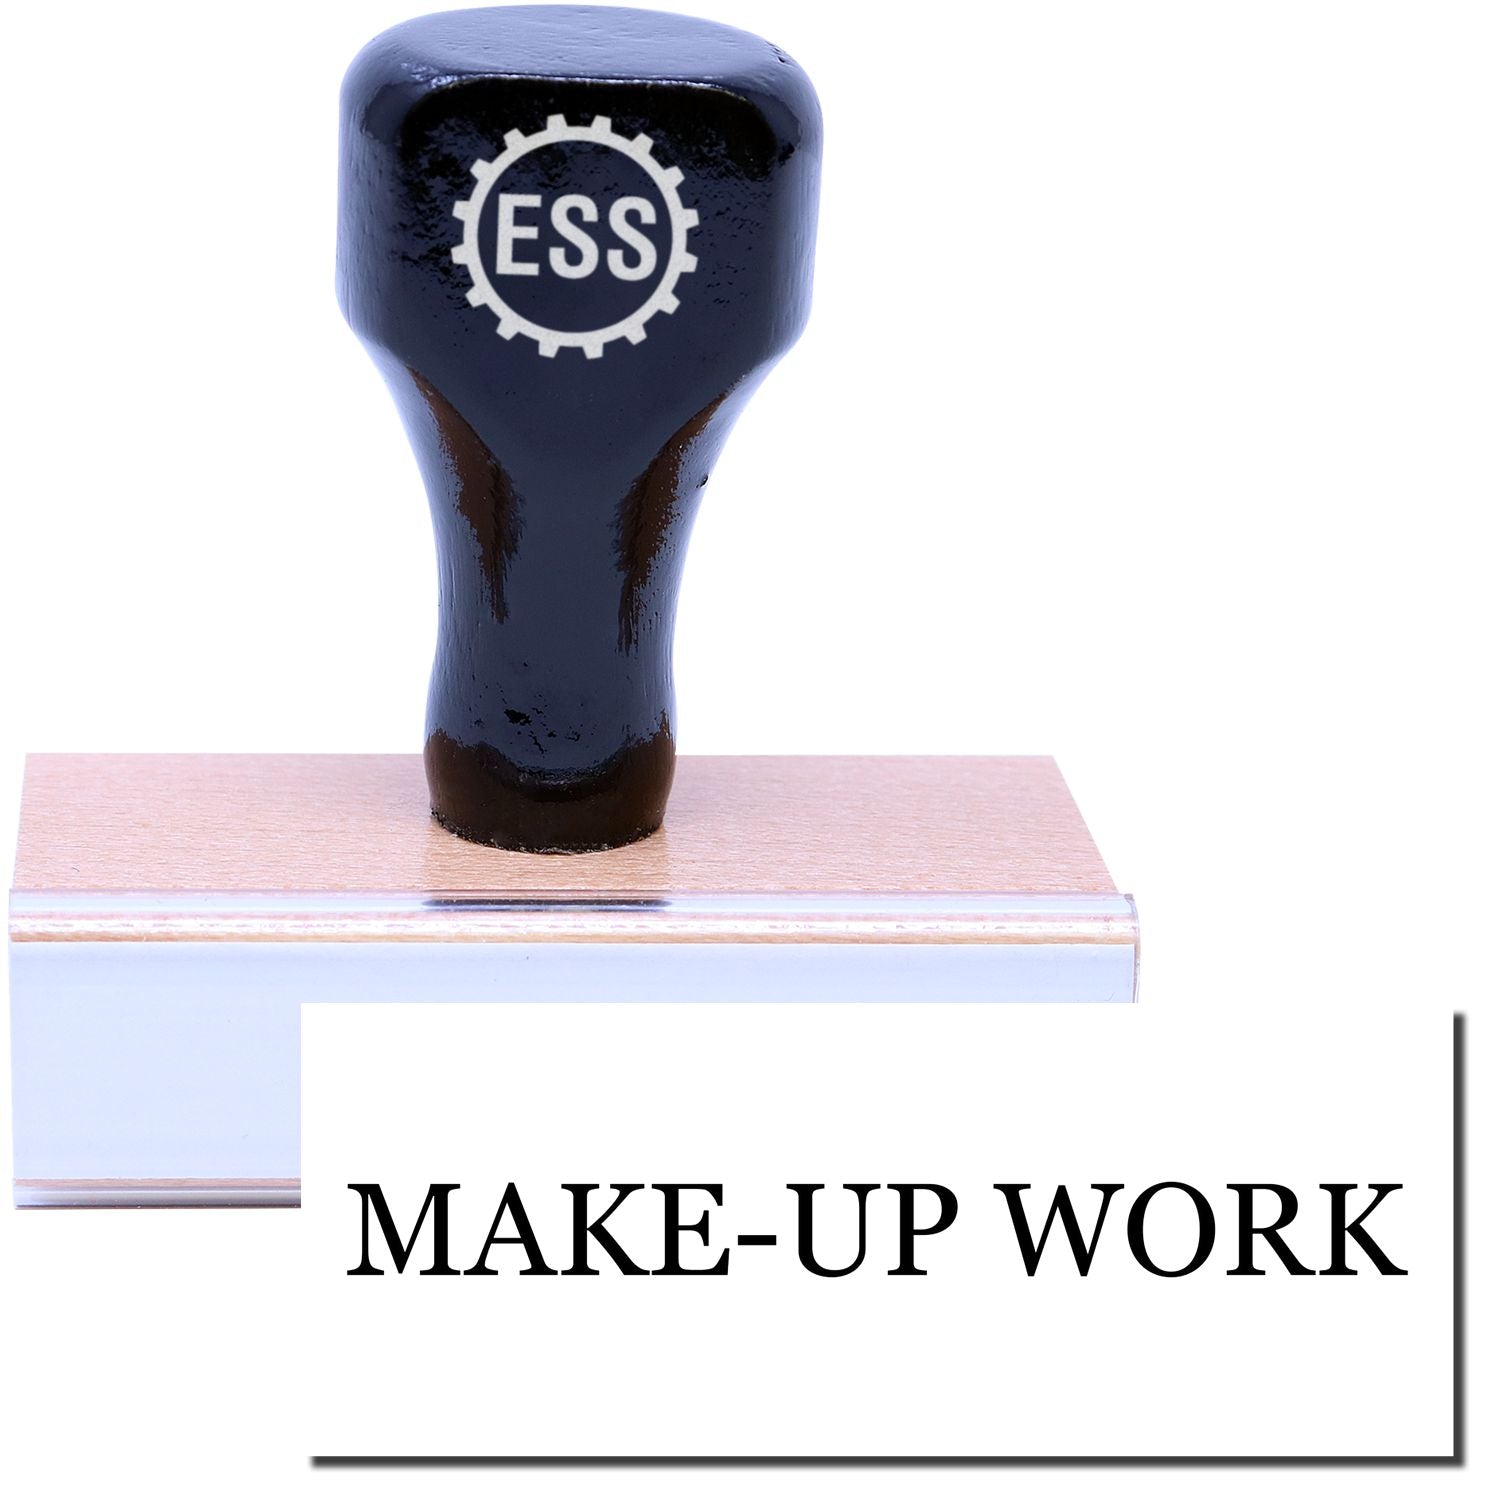 A stock office rubber stamp with a stamped image showing how the text "MAKE-UP WORK" in a large font is displayed after stamping.